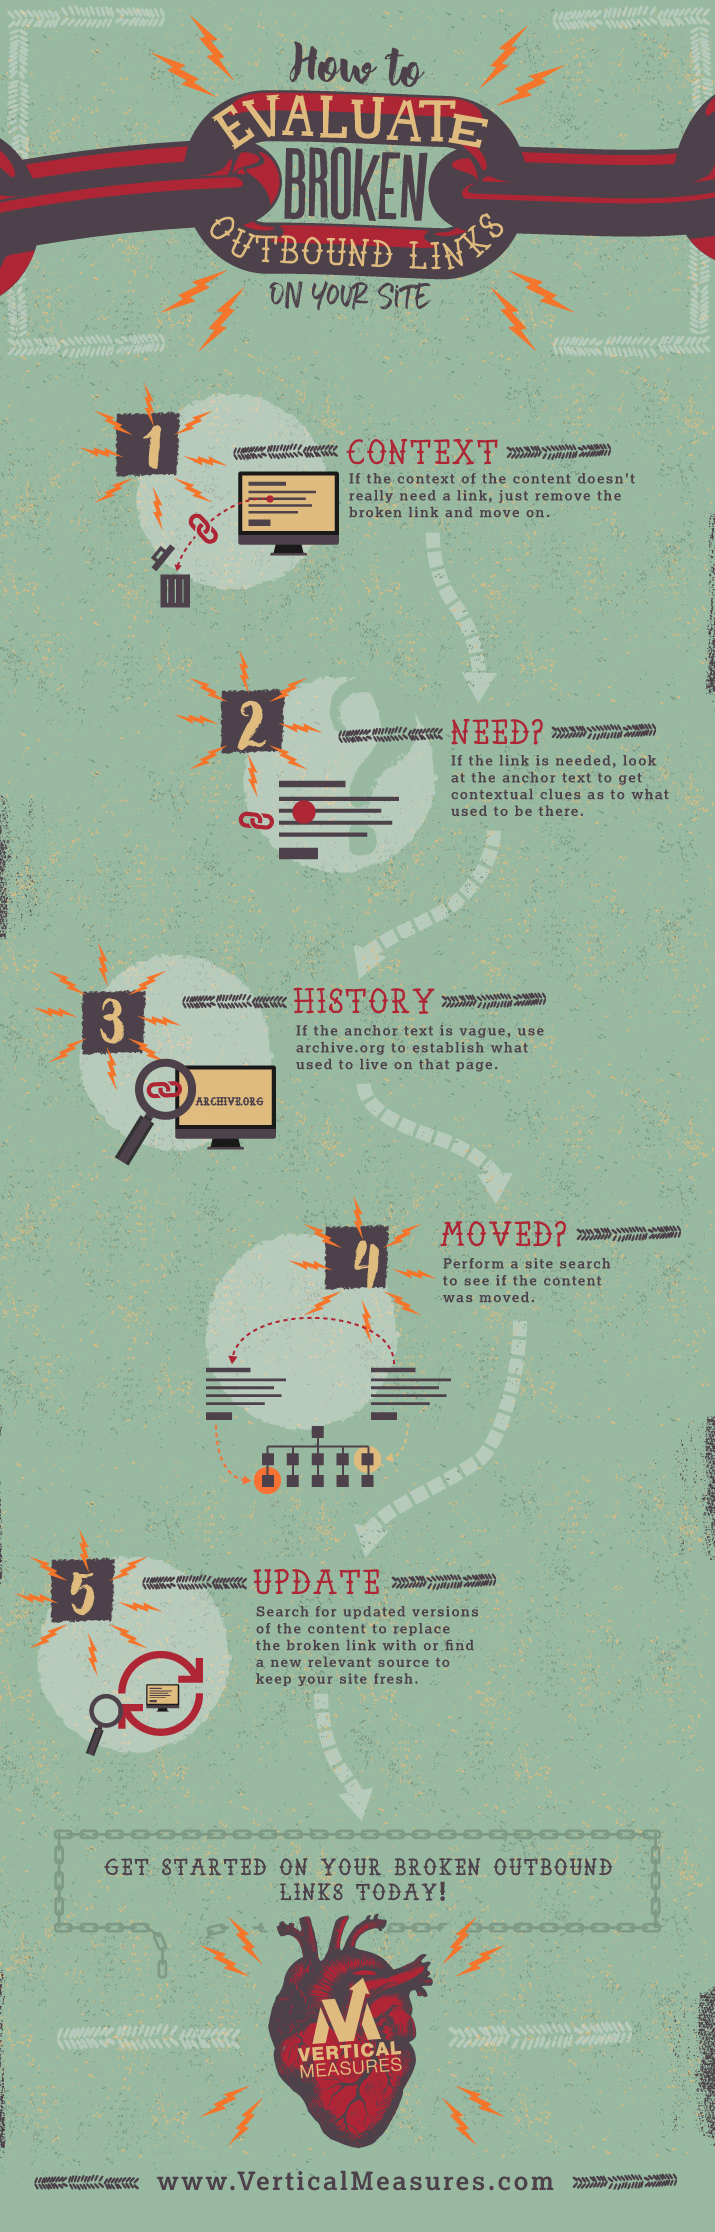 How-To-Evaluate-Broken-Outbound-Links-On-Your-Site-Infographic